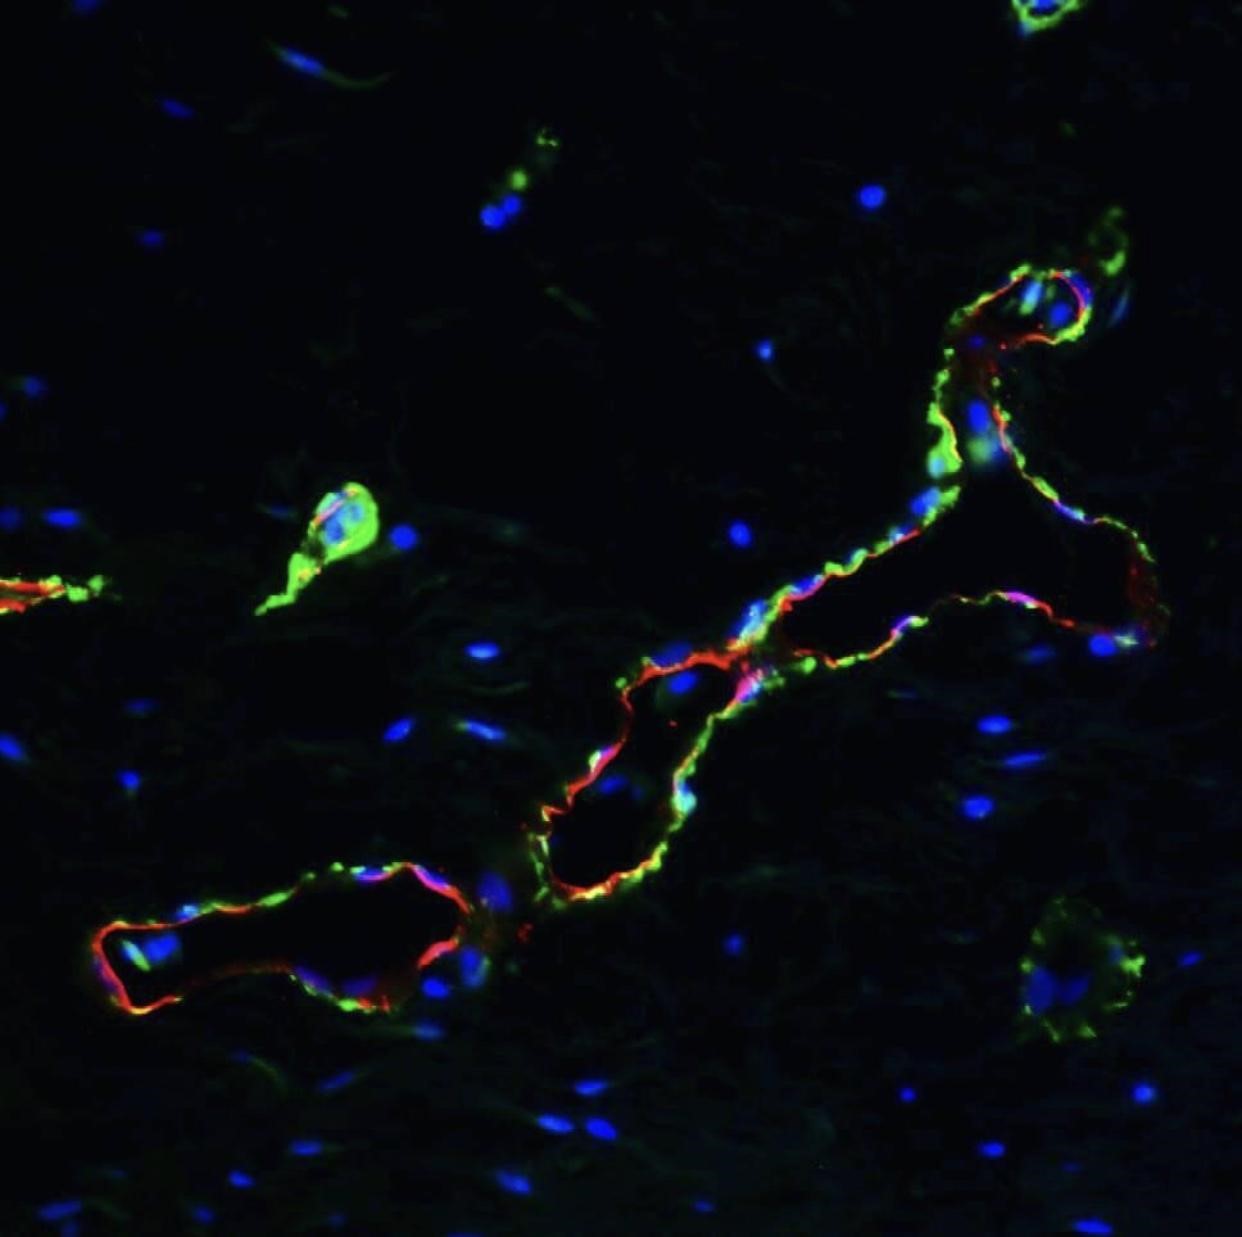 A mature blood vessel. The red fluorescence marker demarcates the outline of a blood vessel. The green fluorescence marker is detecting cells that support the vessel. The blue dots are the nuclei of the cells.